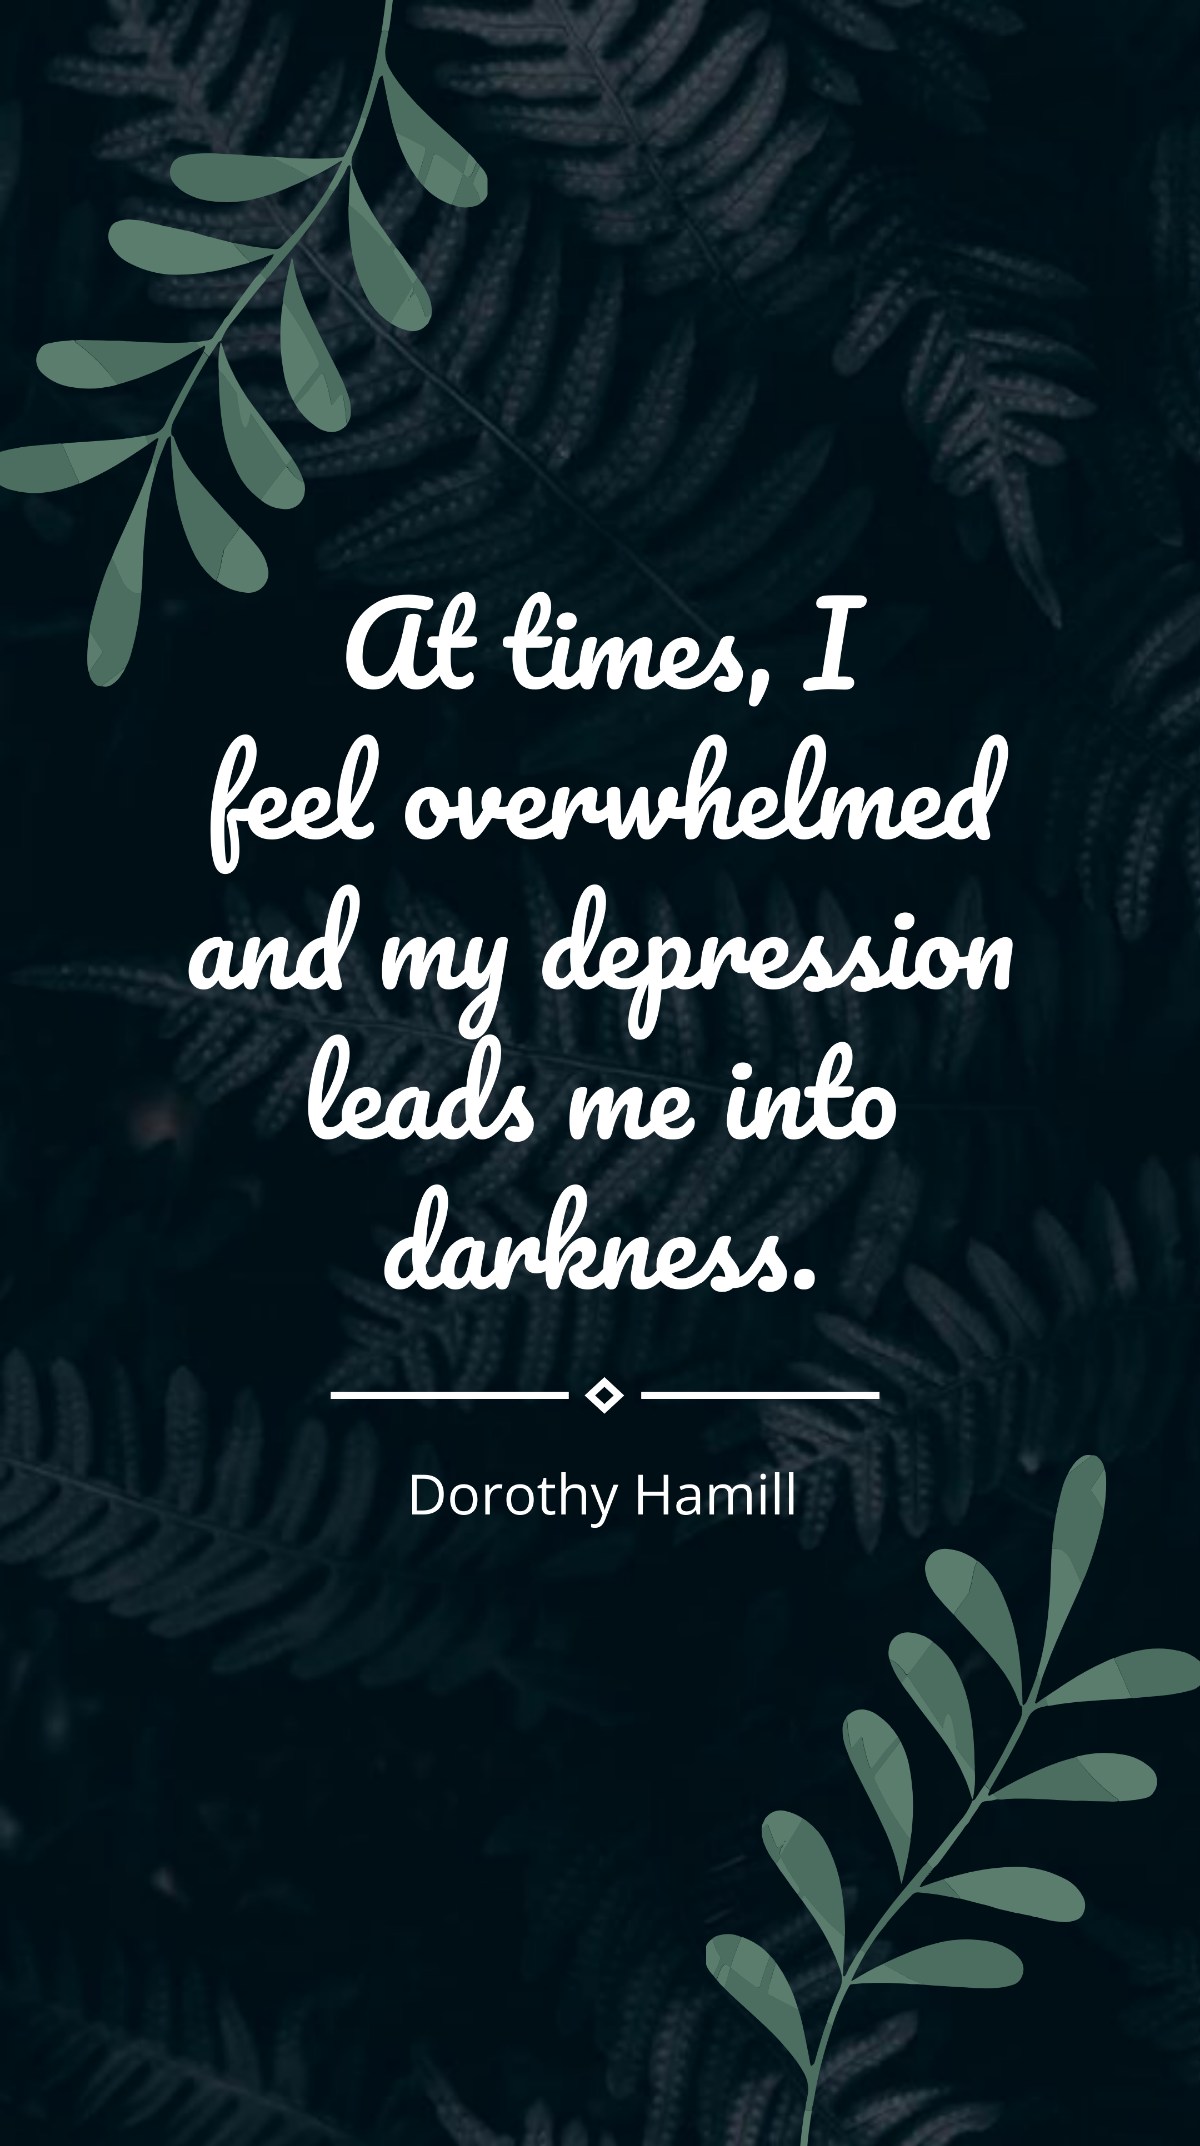 Dorothy Hamill - At times, I feel overwhelmed and my depression leads me into darkness. Template